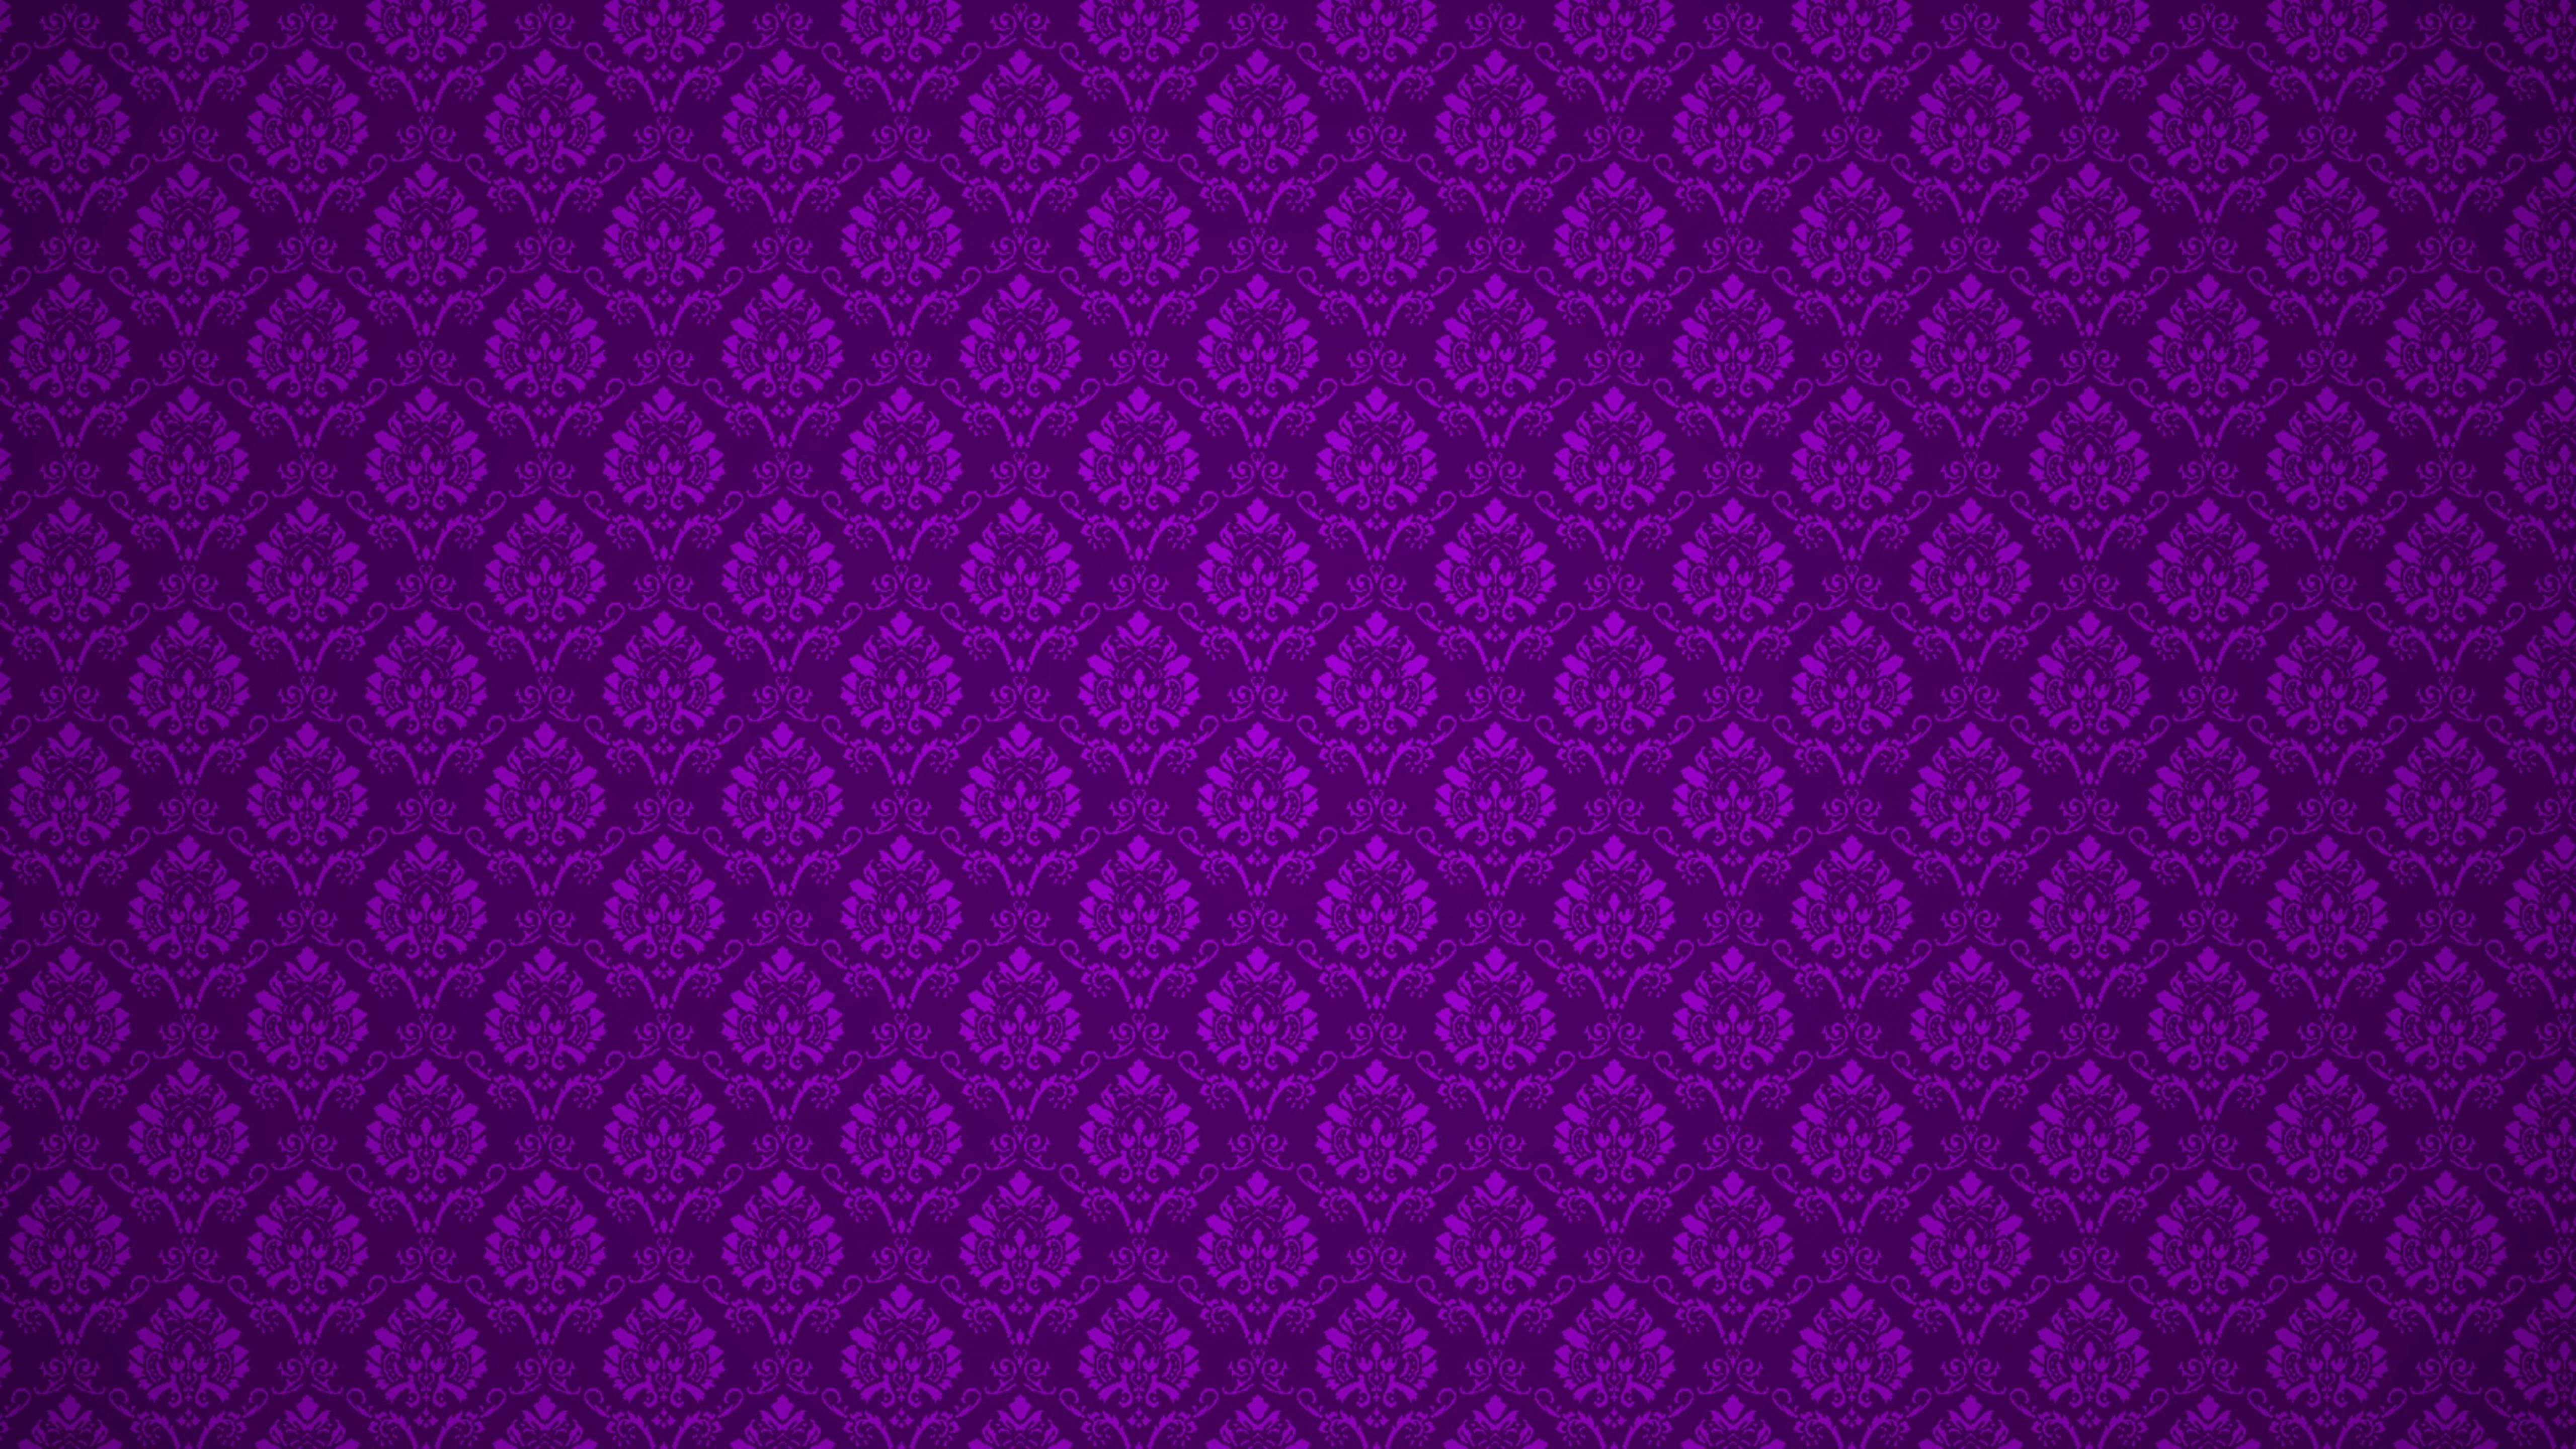 Download free Purple Background Wallpapers 44080 available in different hig...